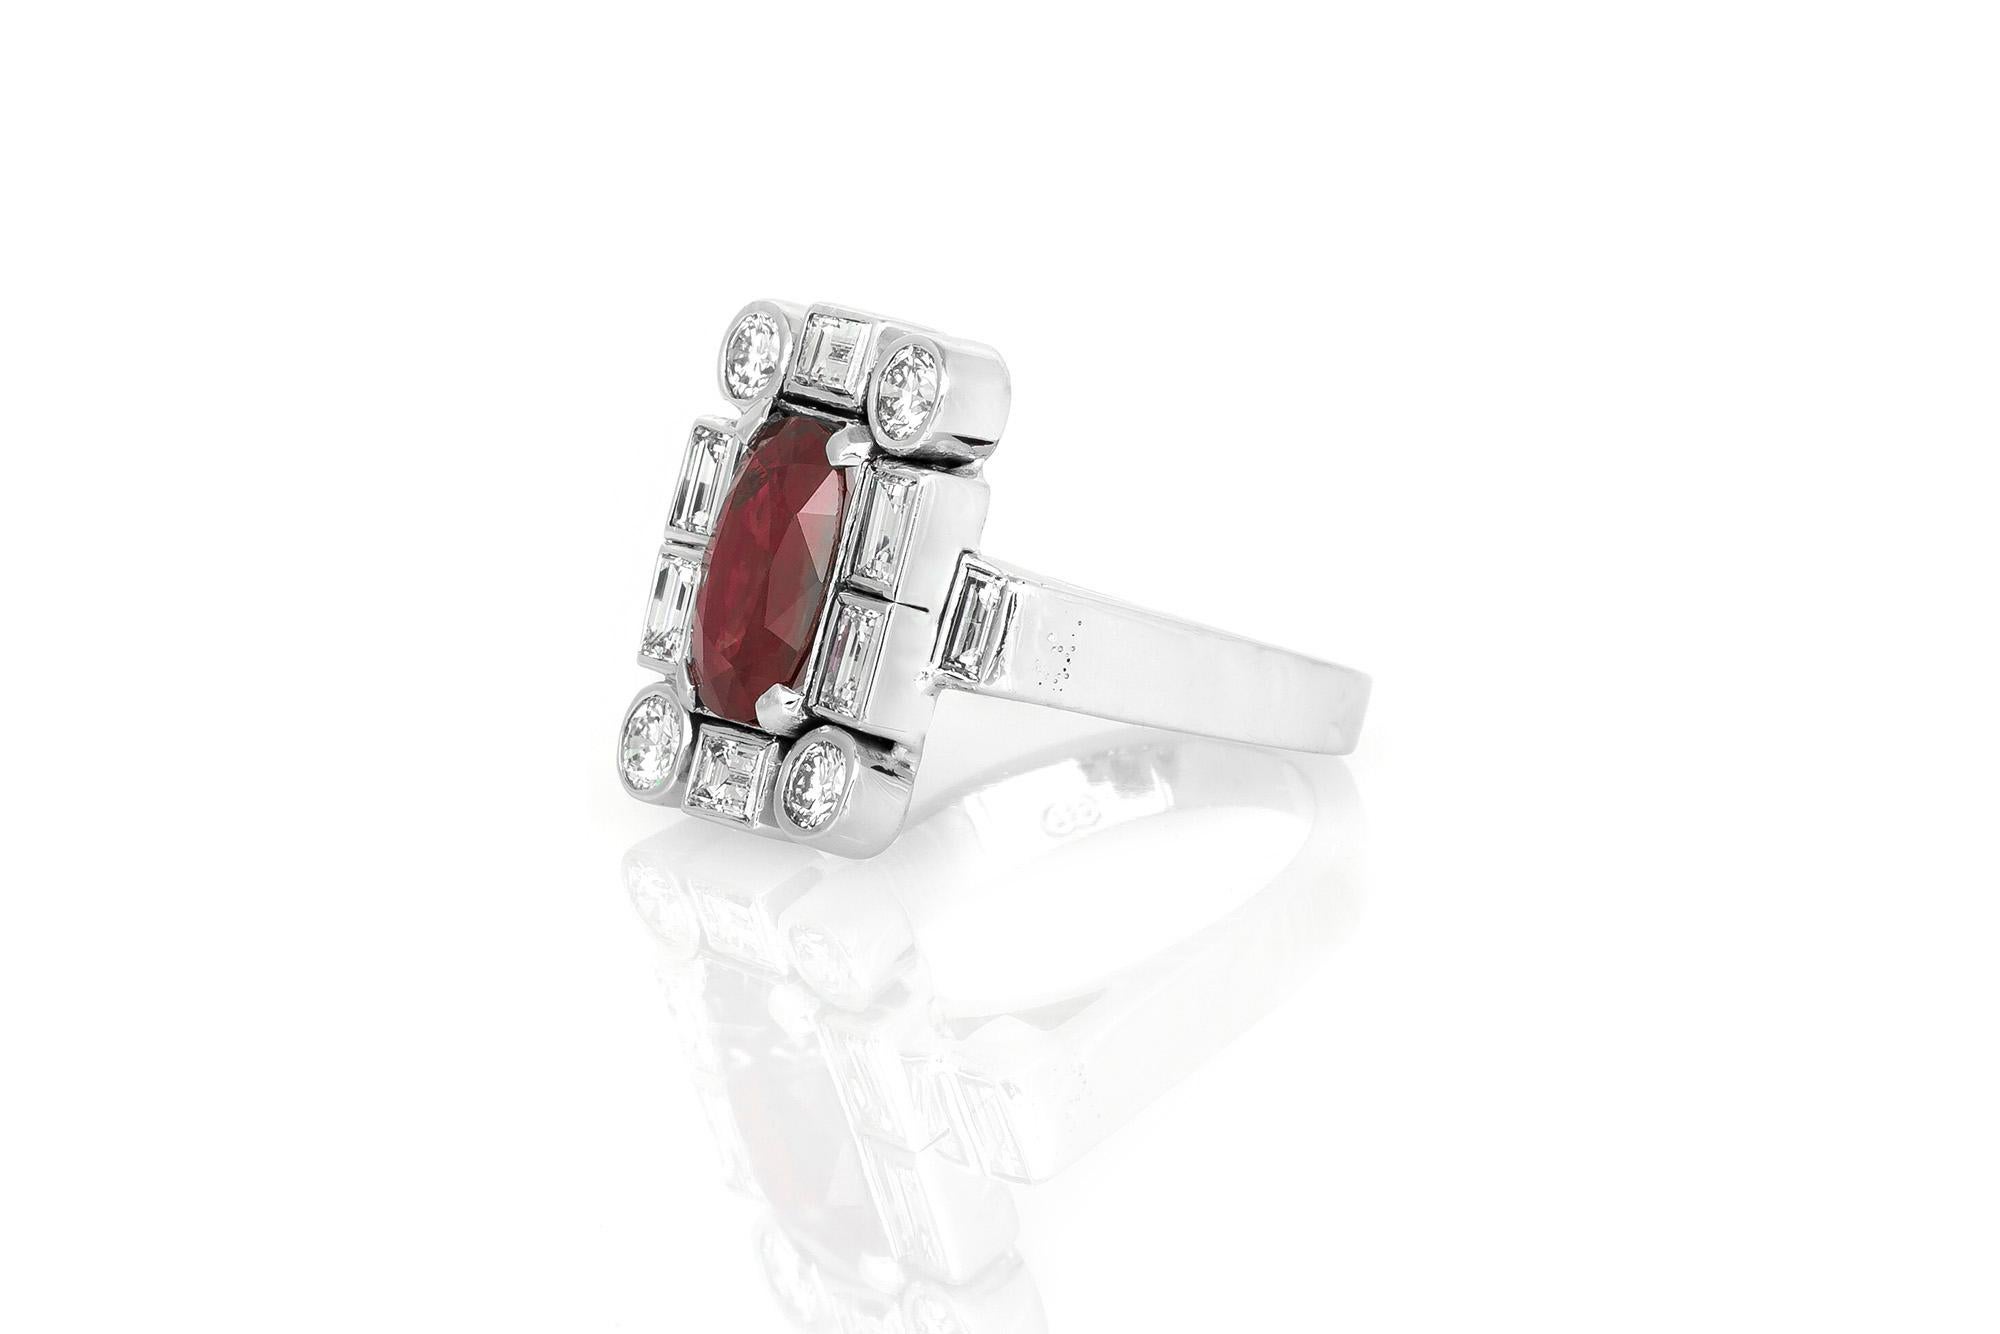 Ring finely crafted in 18K white gold with center ruby weighing approximately 3.00 carat and surrounding diamonds weighing approximately 2.00 carat.
The ring is size 7.5 US and 56 EU.
Circa 1950's.